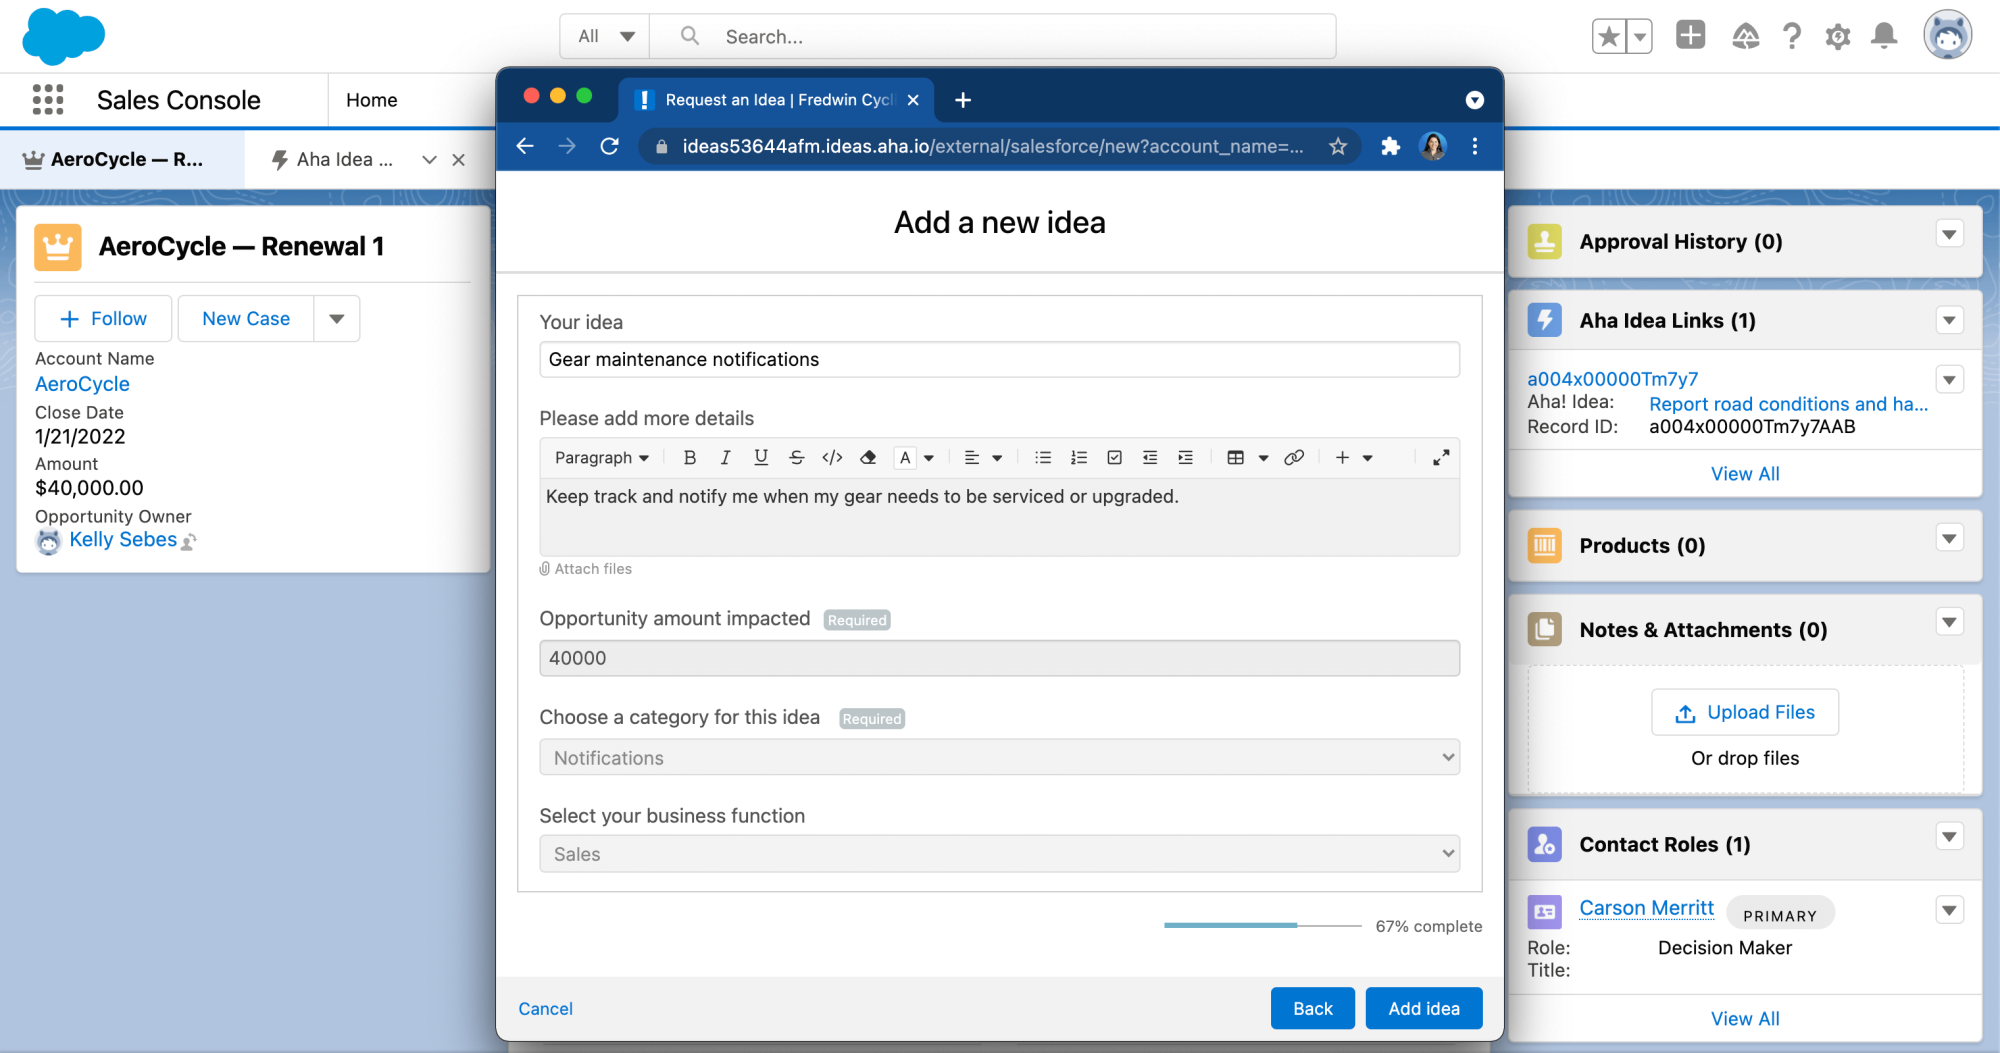 An Aha! dynamic idea submission form in Salesforce Lightning.